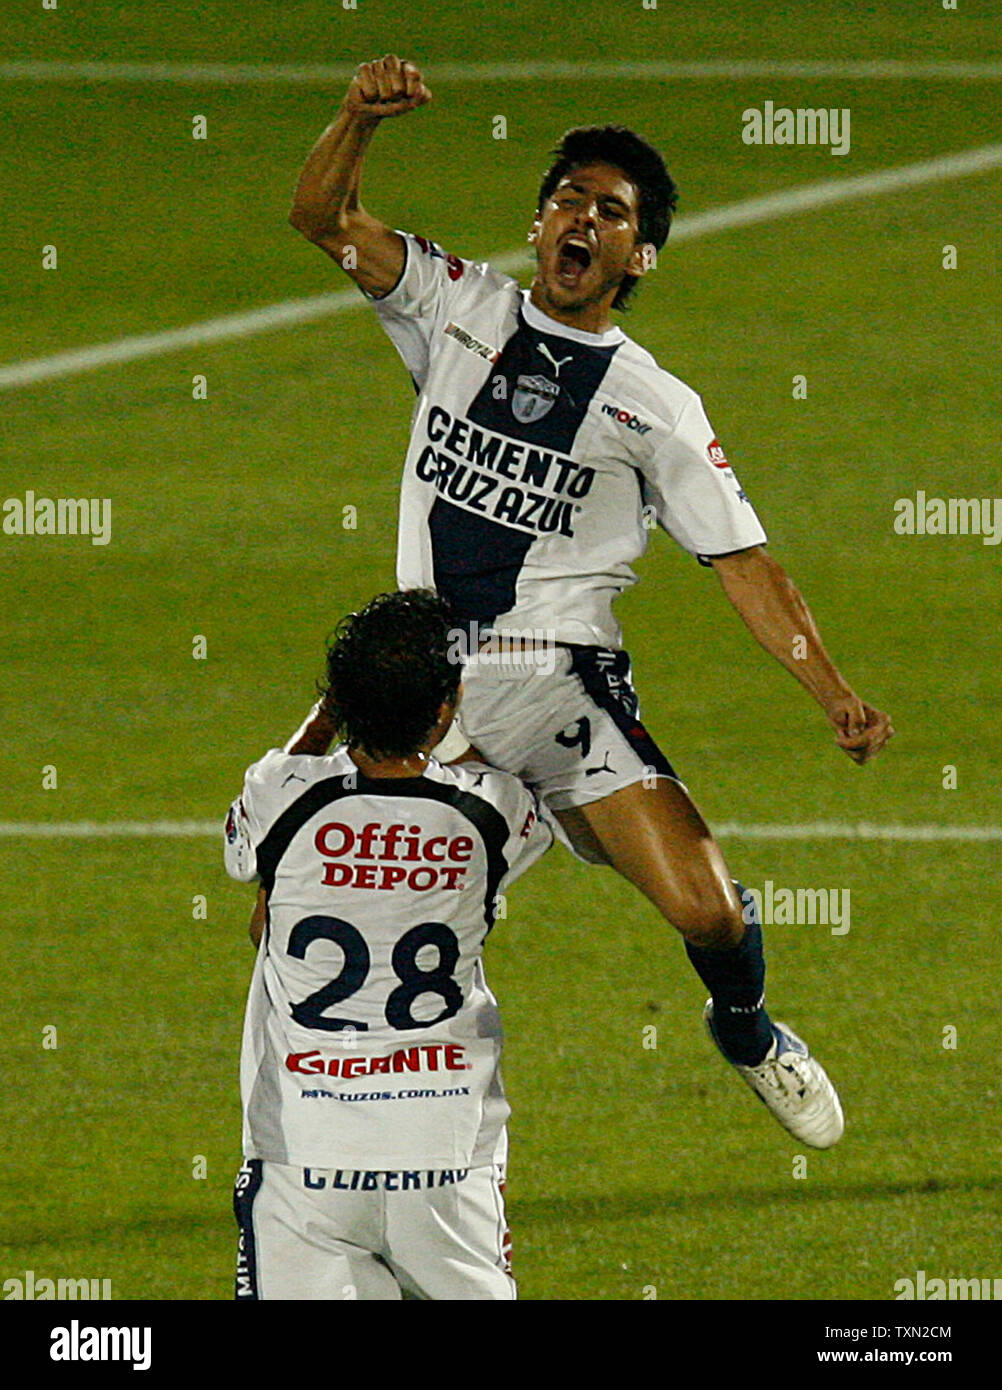 CF Pachuca forward Rafael Marquez Lugo (top) celebrates with his teammate Luis Montes after scoring in the second half against CD Guadalajara at Dick's Sporting Goods Park in Commerce City, Colorado on July 31, 2007. Pachuca defeated Guadalajara 1-0 to advance to the semifinals of the 2007 SuperLiga.   (UPI Photo/Gary C. Caskey) Stock Photo